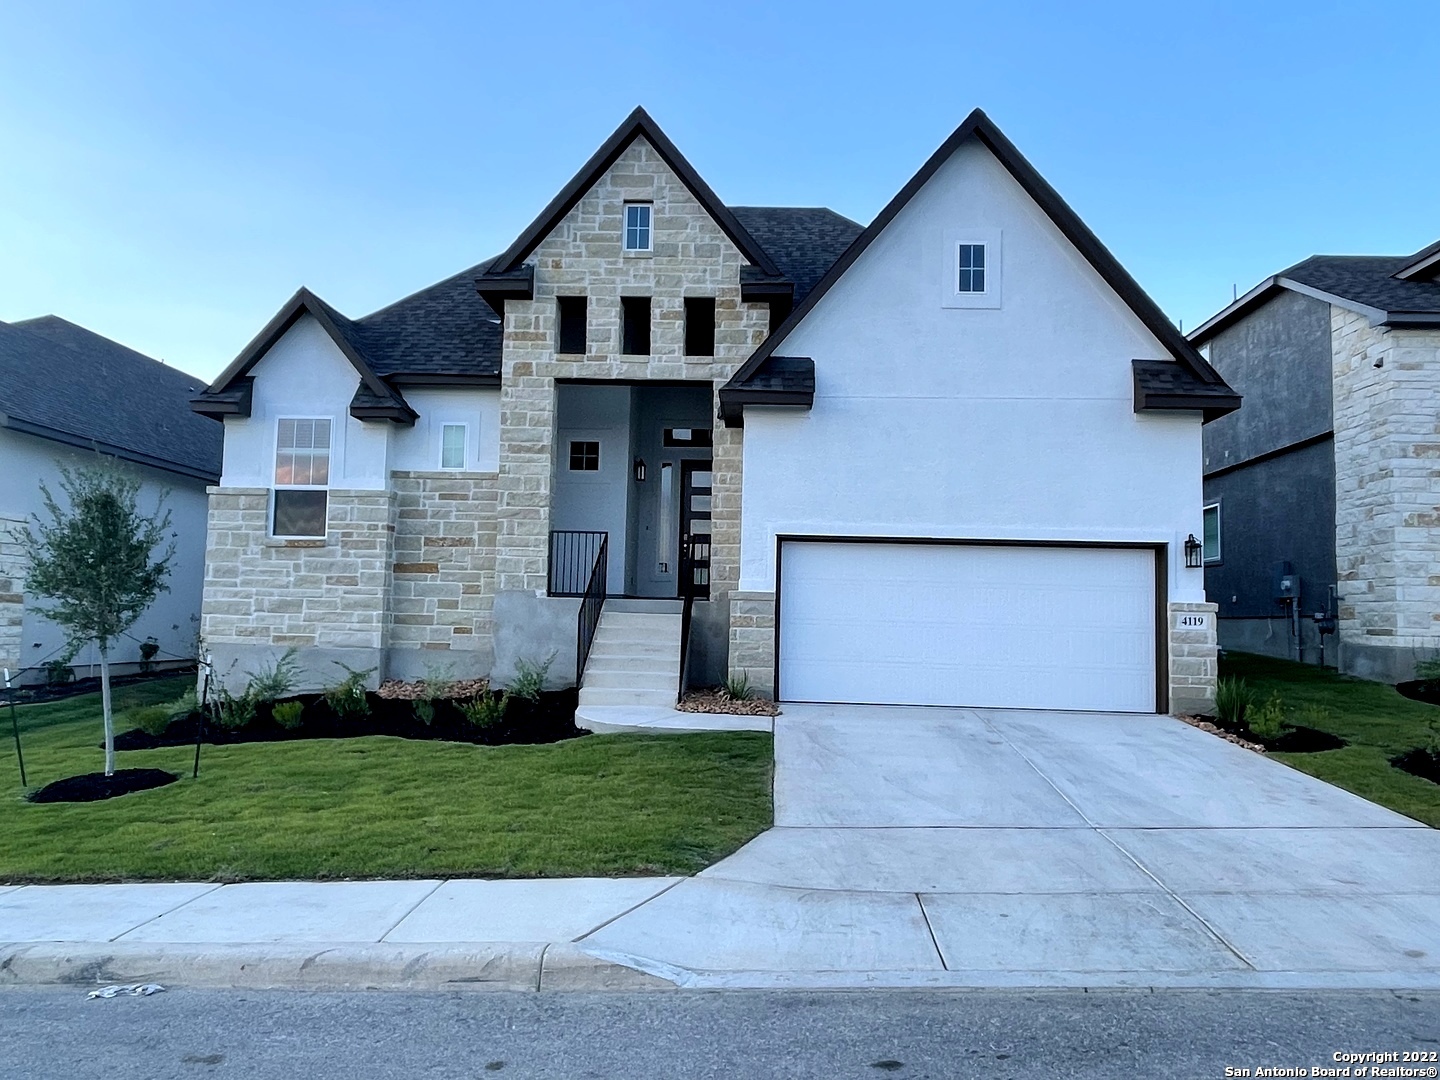 WELCOME HOME!! MOVE-IN READY. Beautiful one story home in a greenbelt lot. Open floor plan with stunning vaulted ceiling and oversized windows in family room. Granite counter tops and outdoor fireplace. Centrally located, near schools shopping and much more.